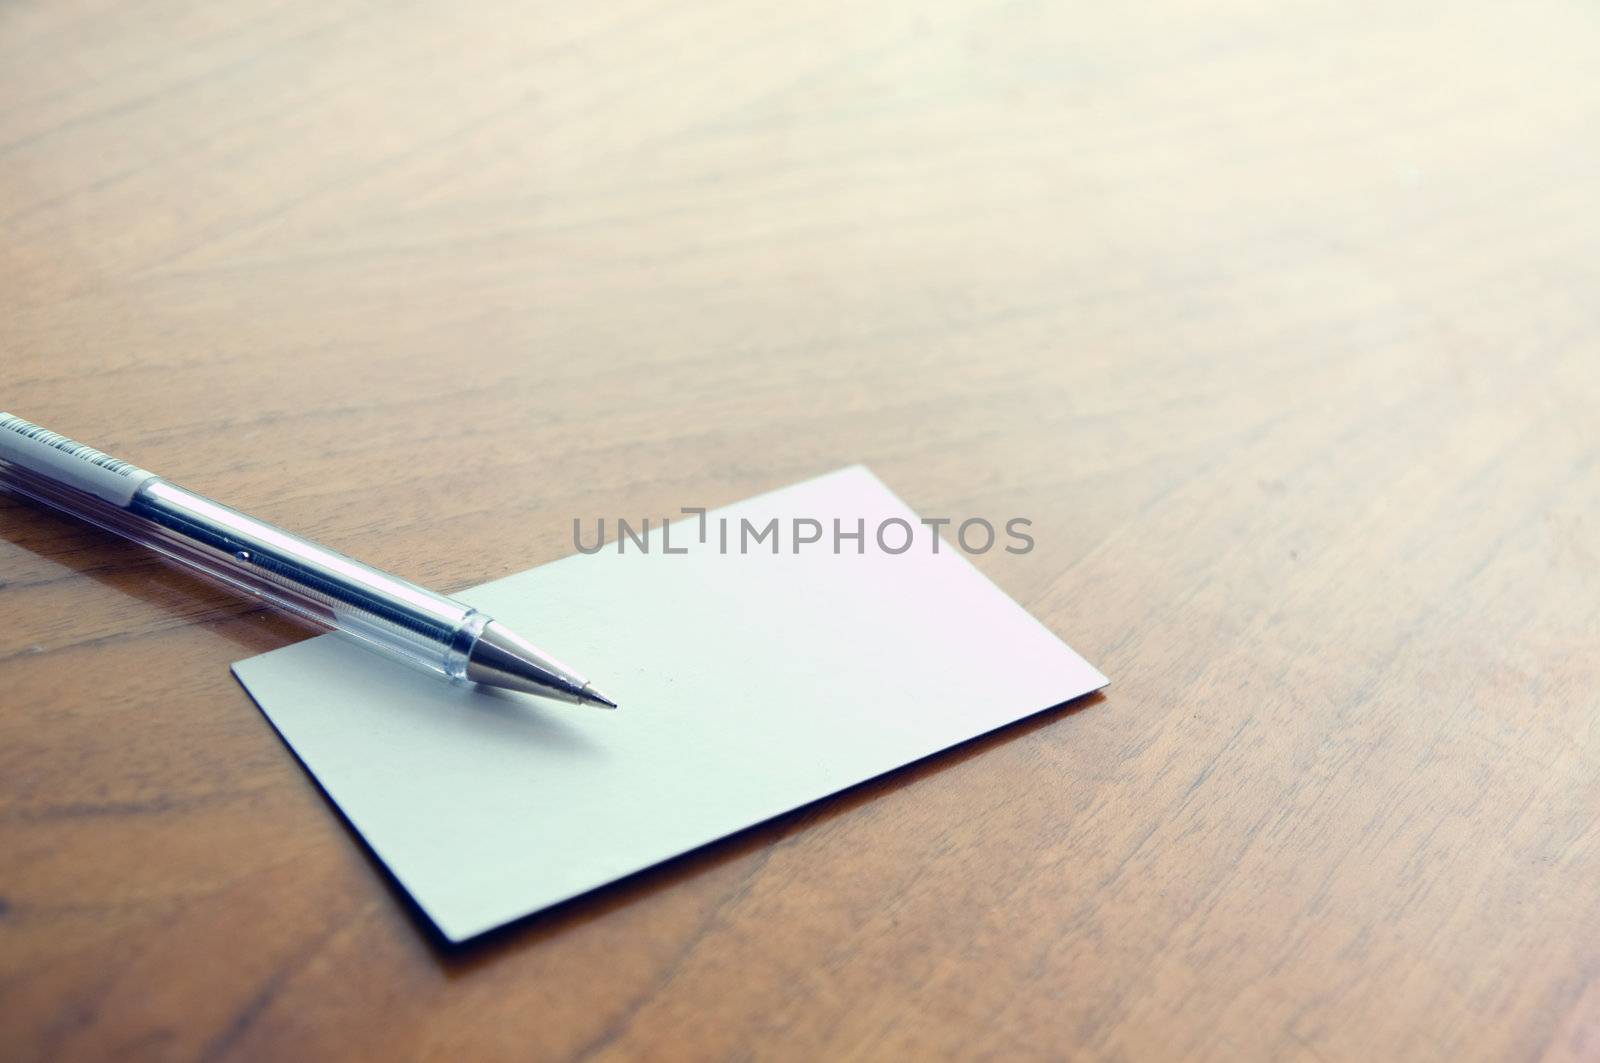 Pencil and empty business card business background